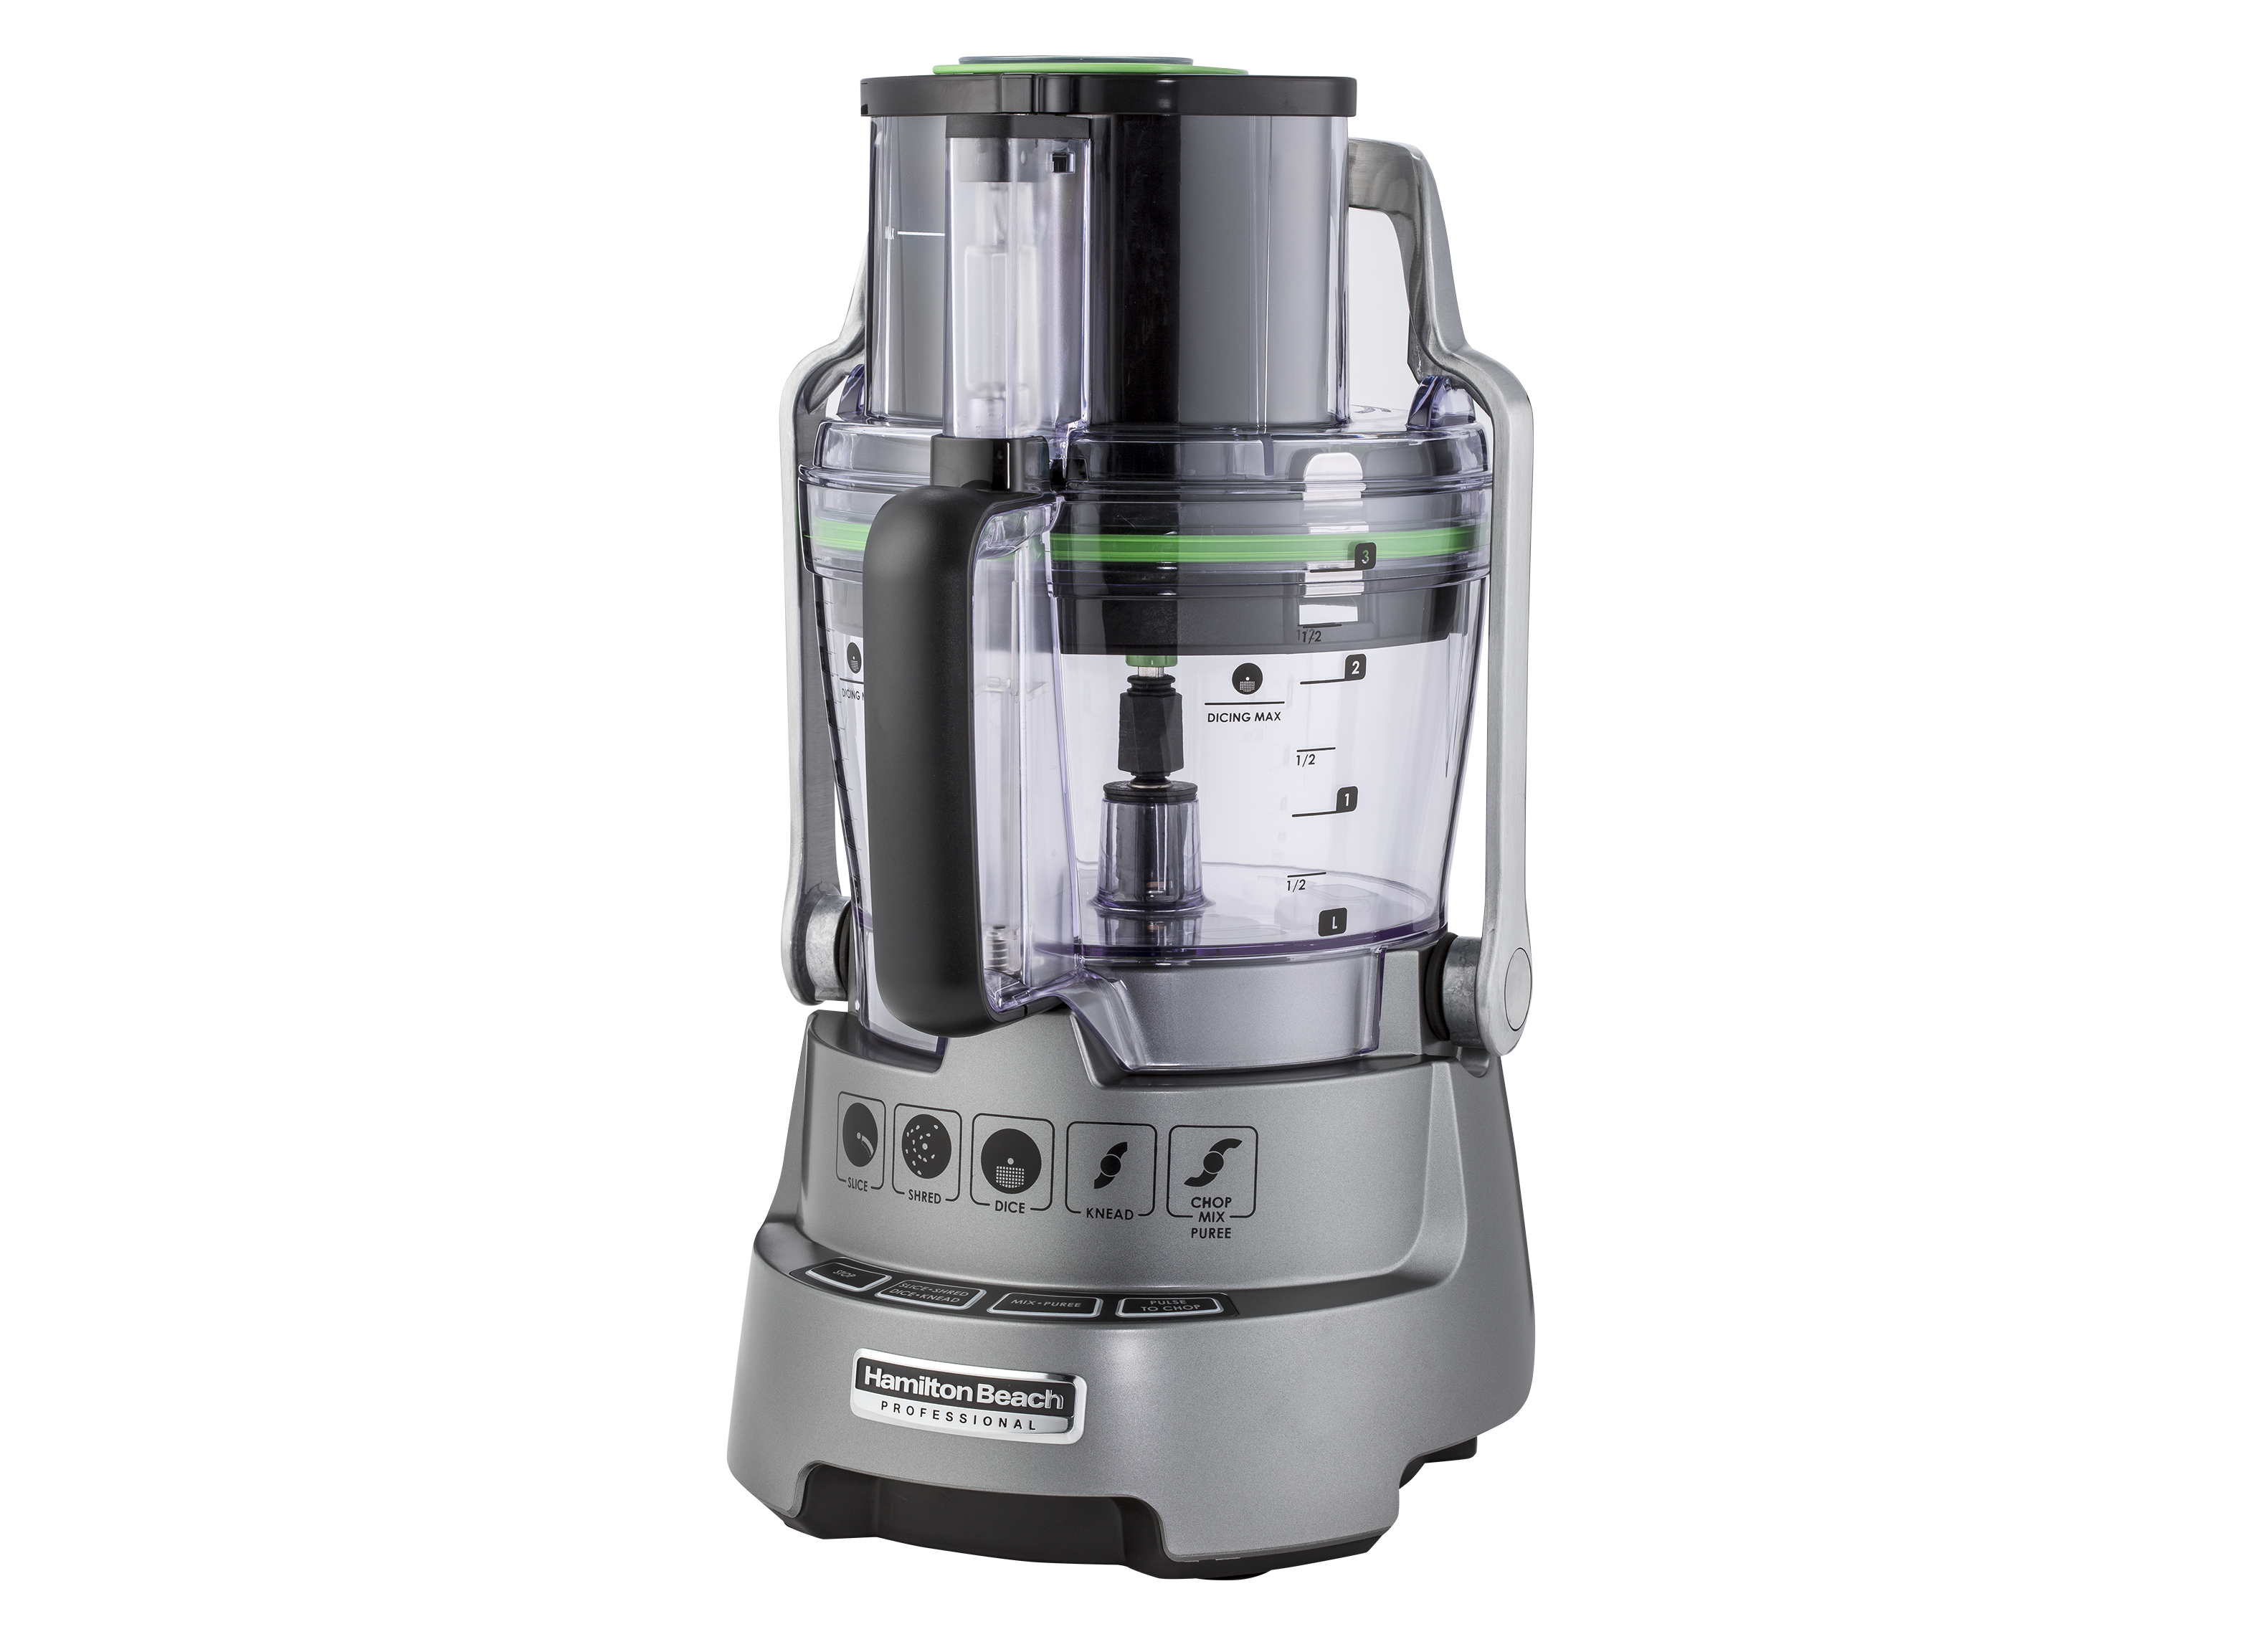 https://crdms.images.consumerreports.org/prod/products/cr/models/387444-foodprocessors-hamiltonbeach-professional14cup70825.png